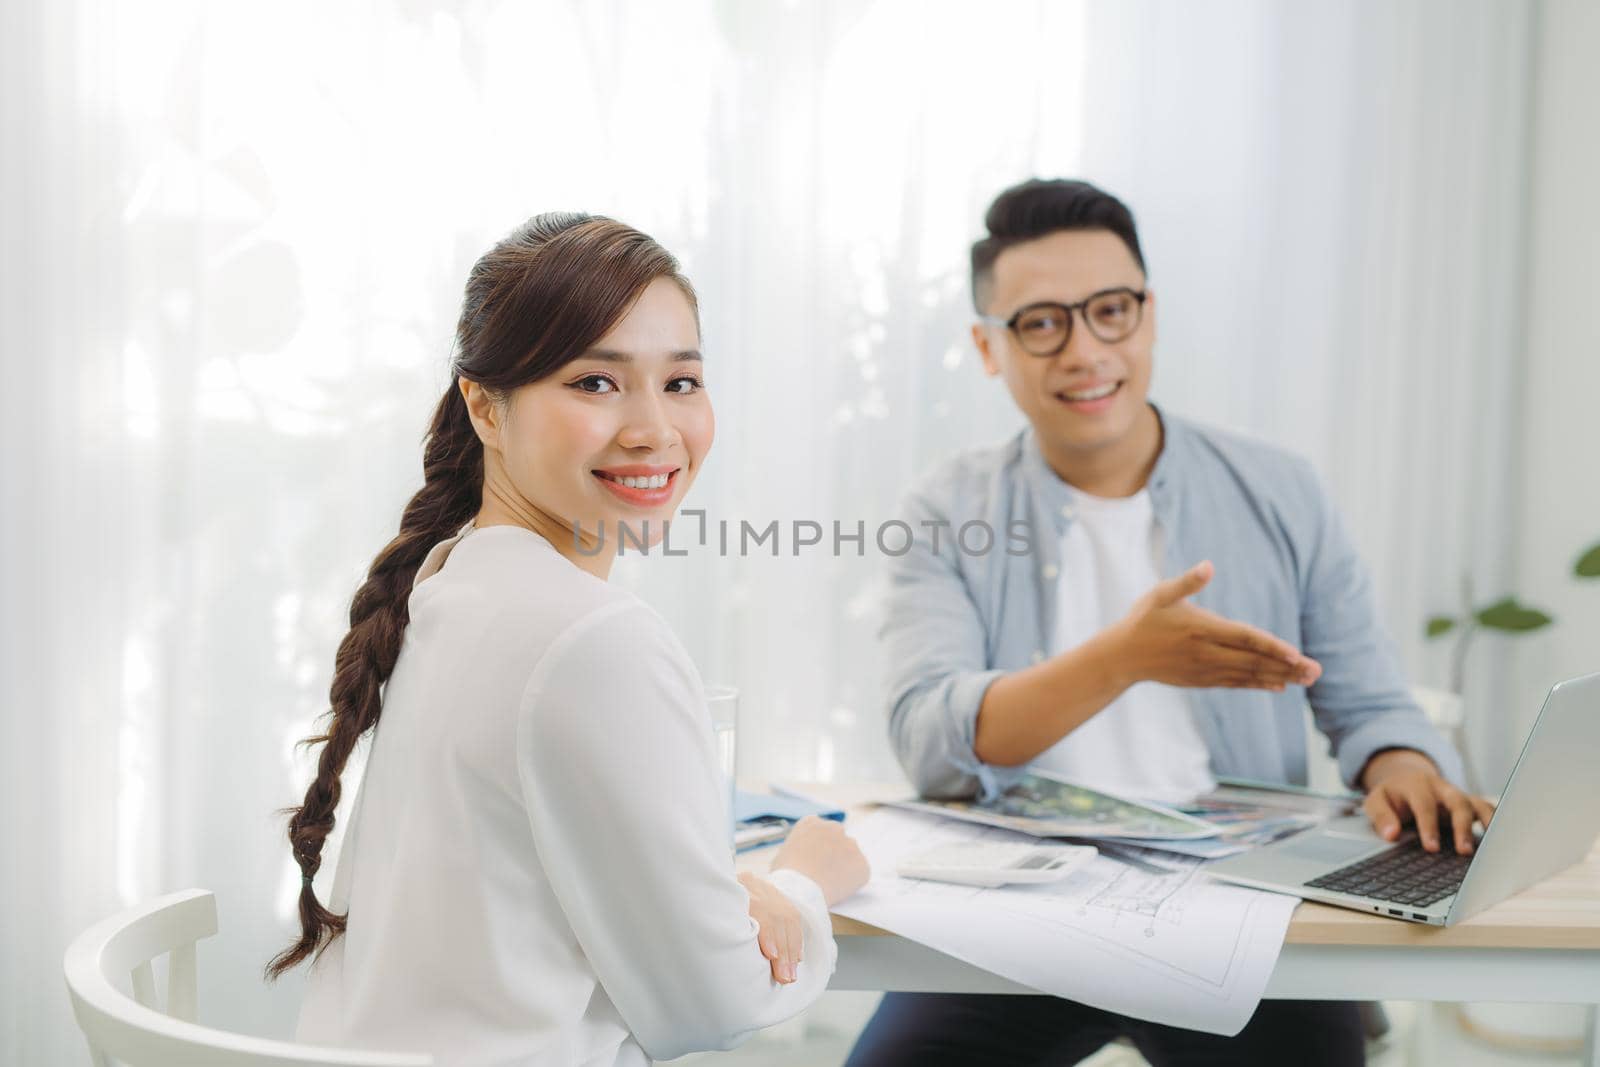 Male and female architect discussing a set of blueprints spread out on a table at office.